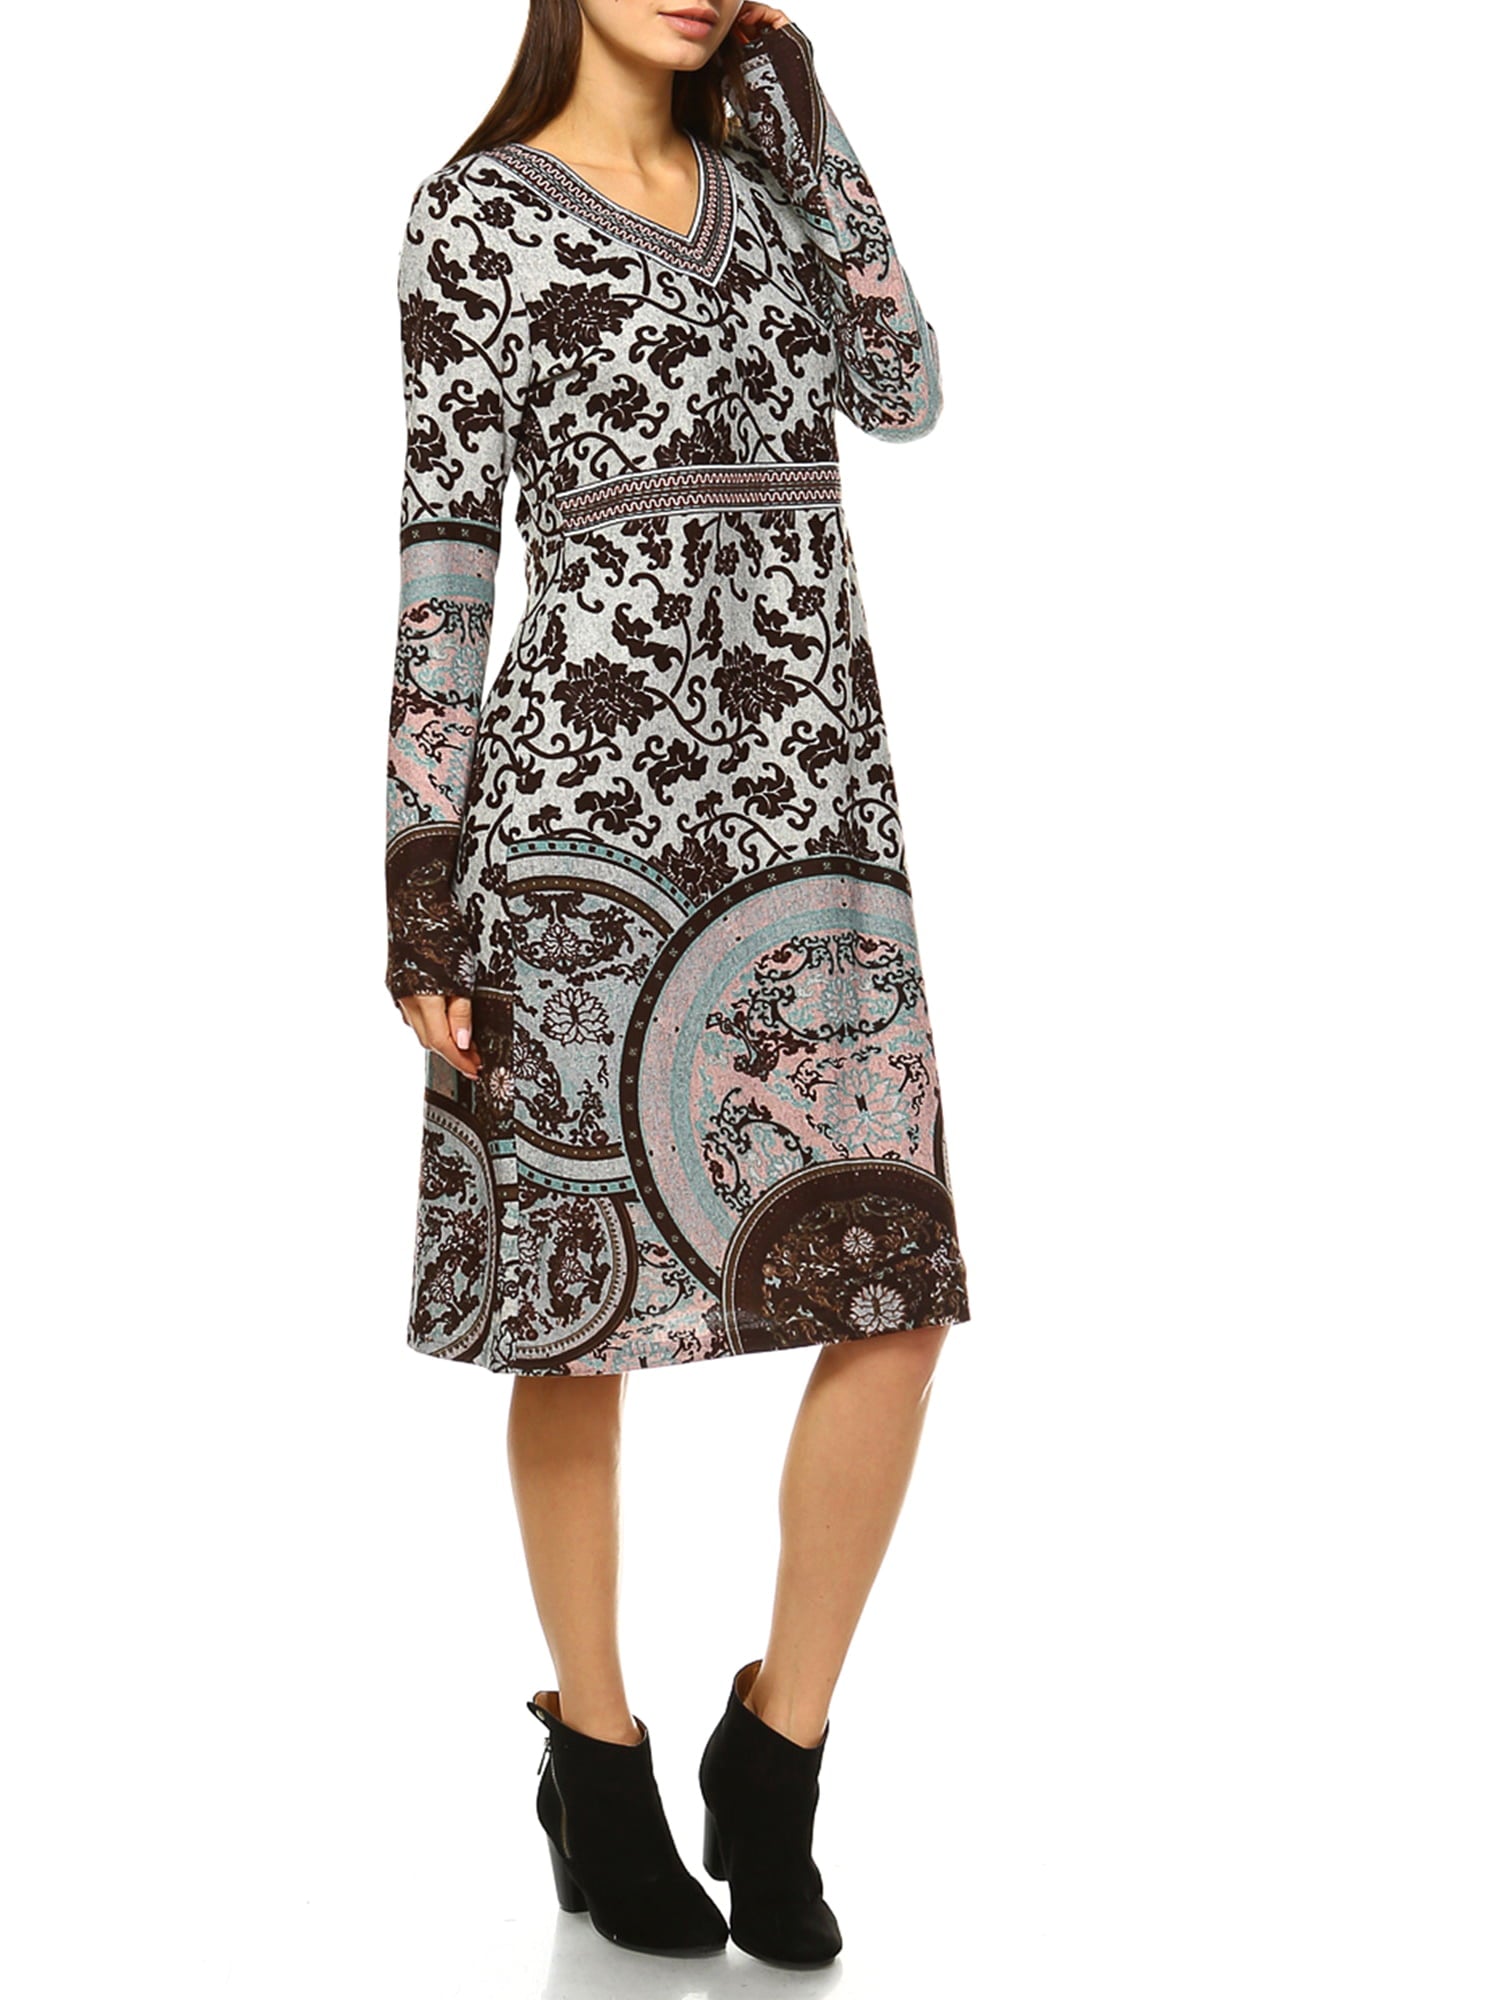 Women's Naarah Embroidered Sweater Dress - image 2 of 4